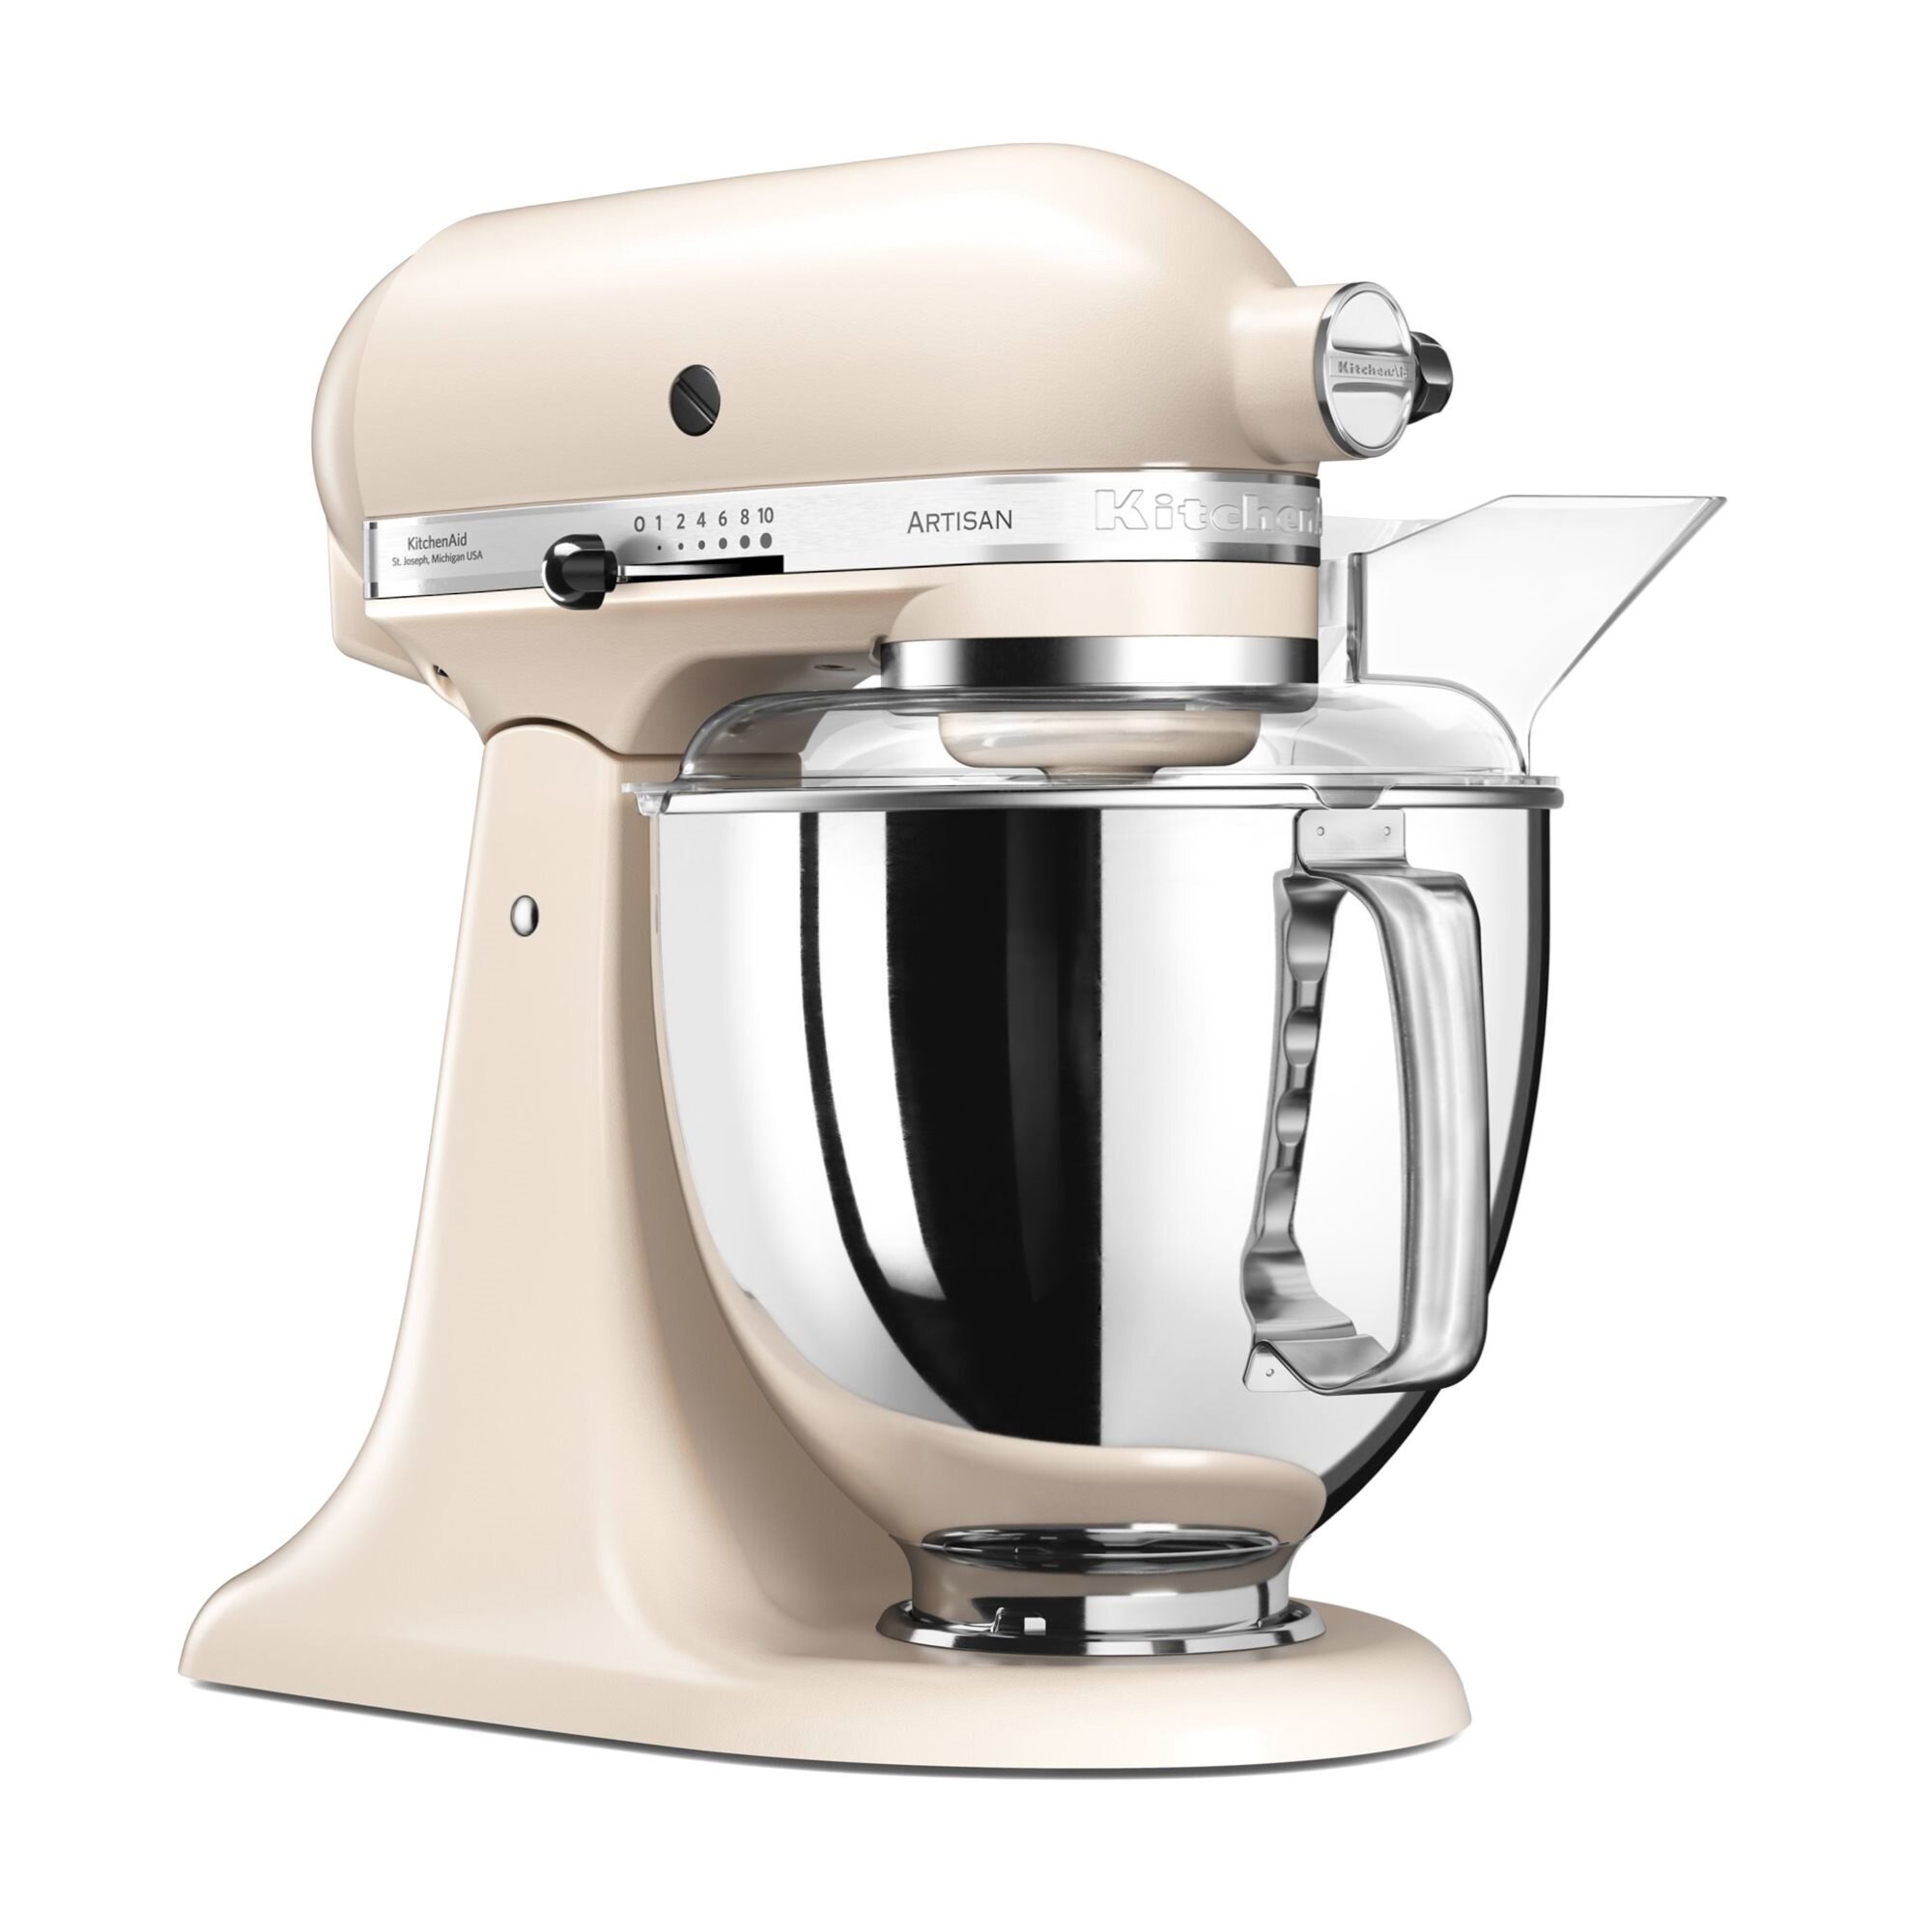 What's wrong Wedge Briefcase Mixer Artisan 4.8L, Model 175, Almond Cream - KitchenAid - eMAG.ro